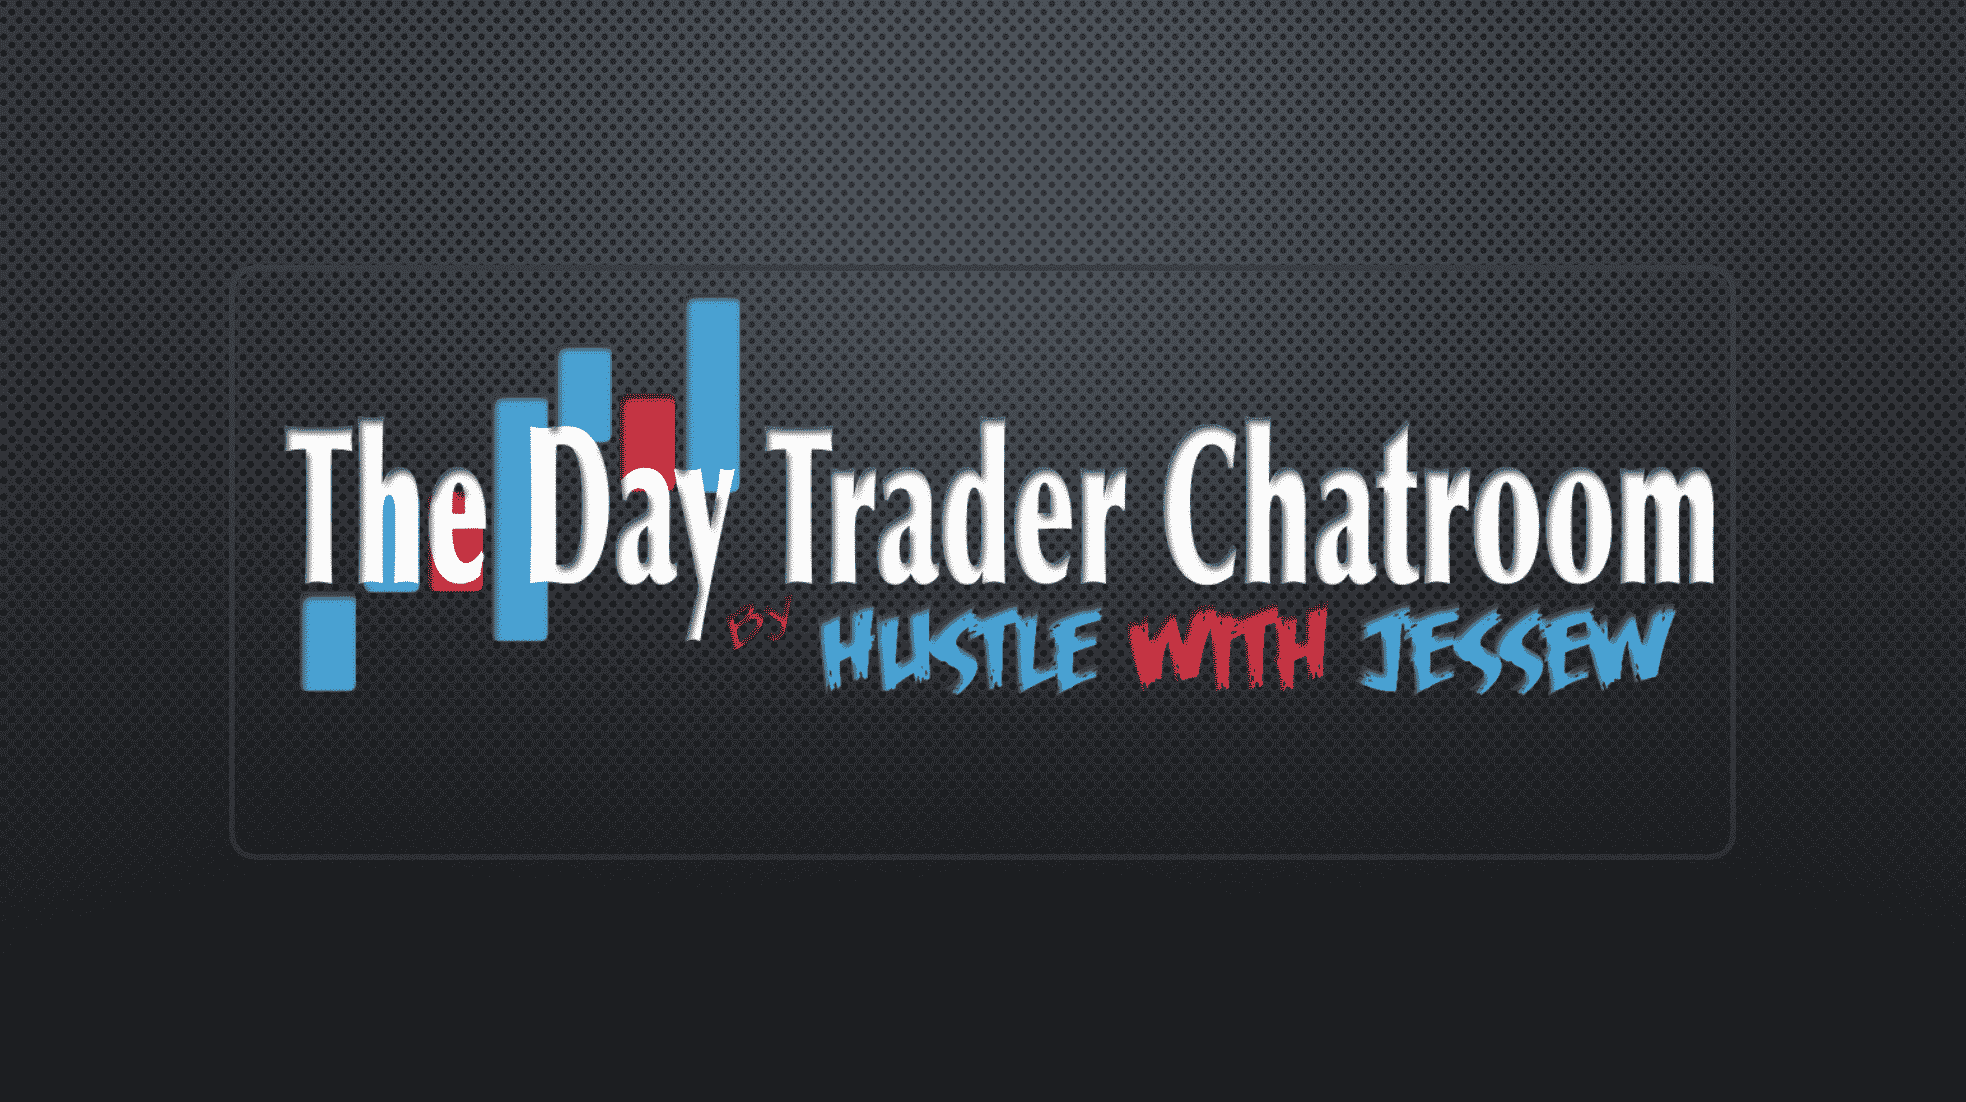 Trading Chat Room in dtc